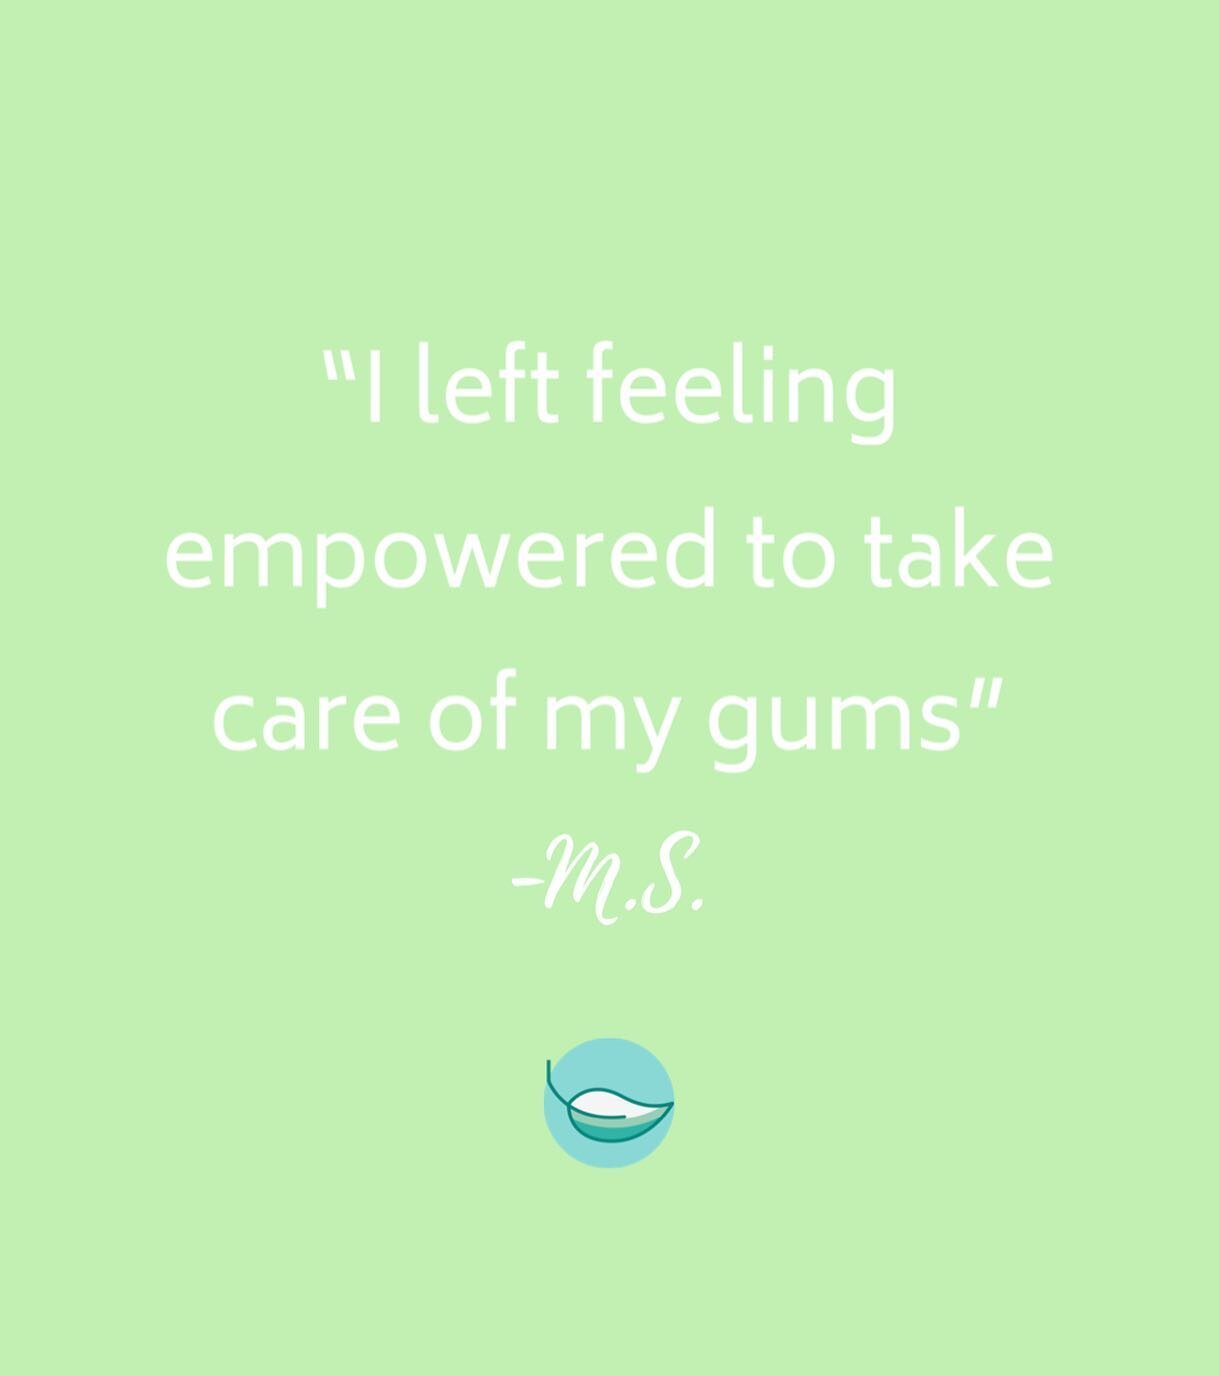 &ldquo;Joanna was so amazing and my experience was unlike any other I have had before. I didn't feel rushed and I left feeling empowered to take care of my gums after 28 years of never feeling that way. I am so grateful I found Joanna and even though